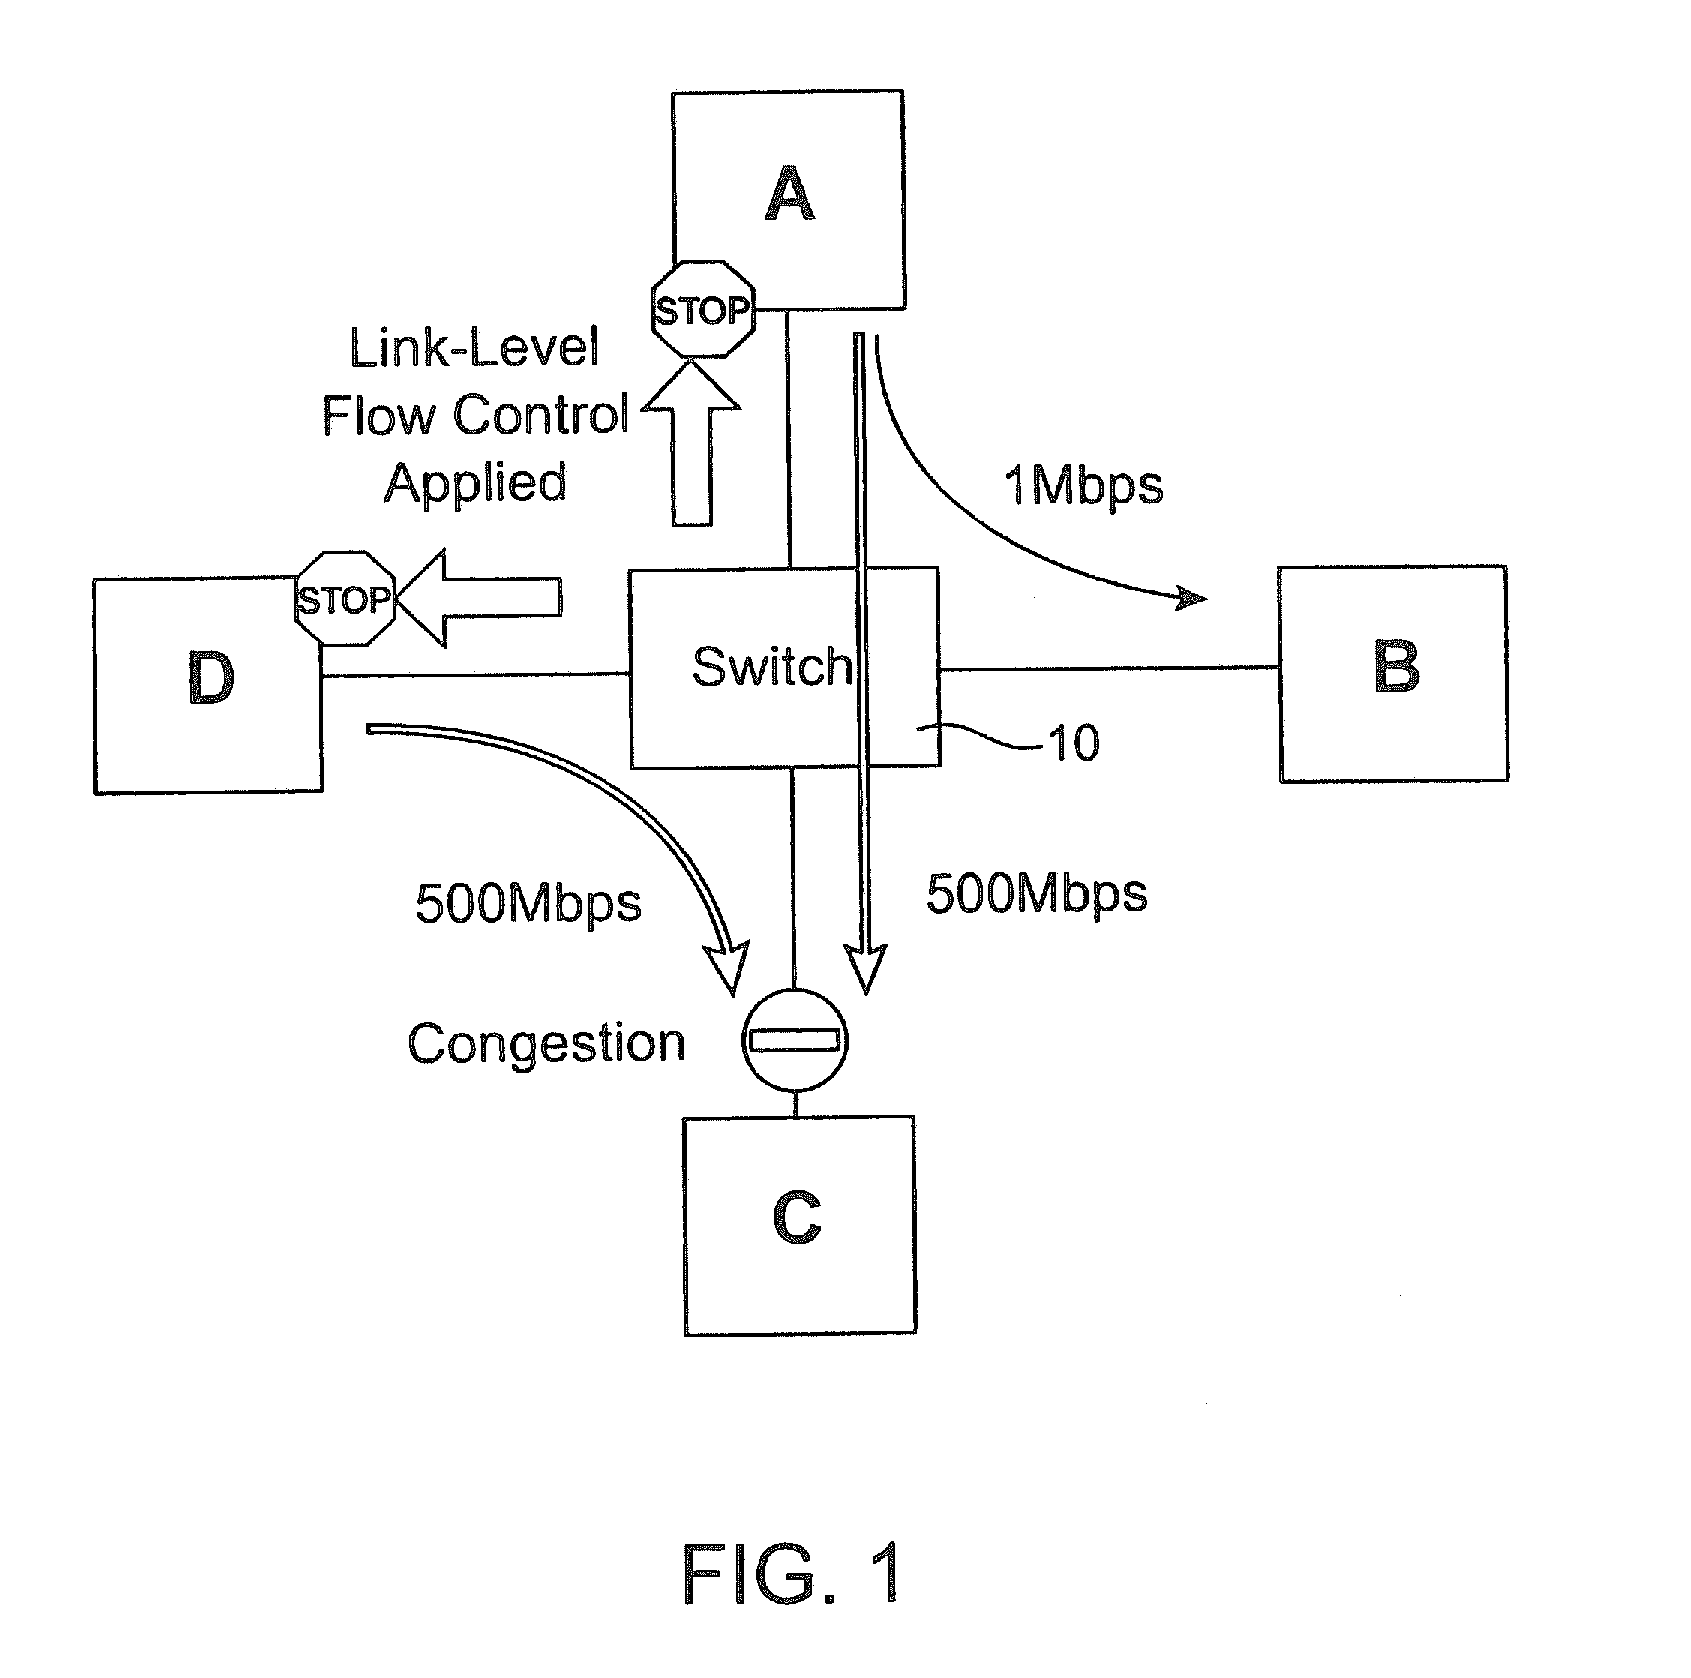 Network congestion management systems and methods